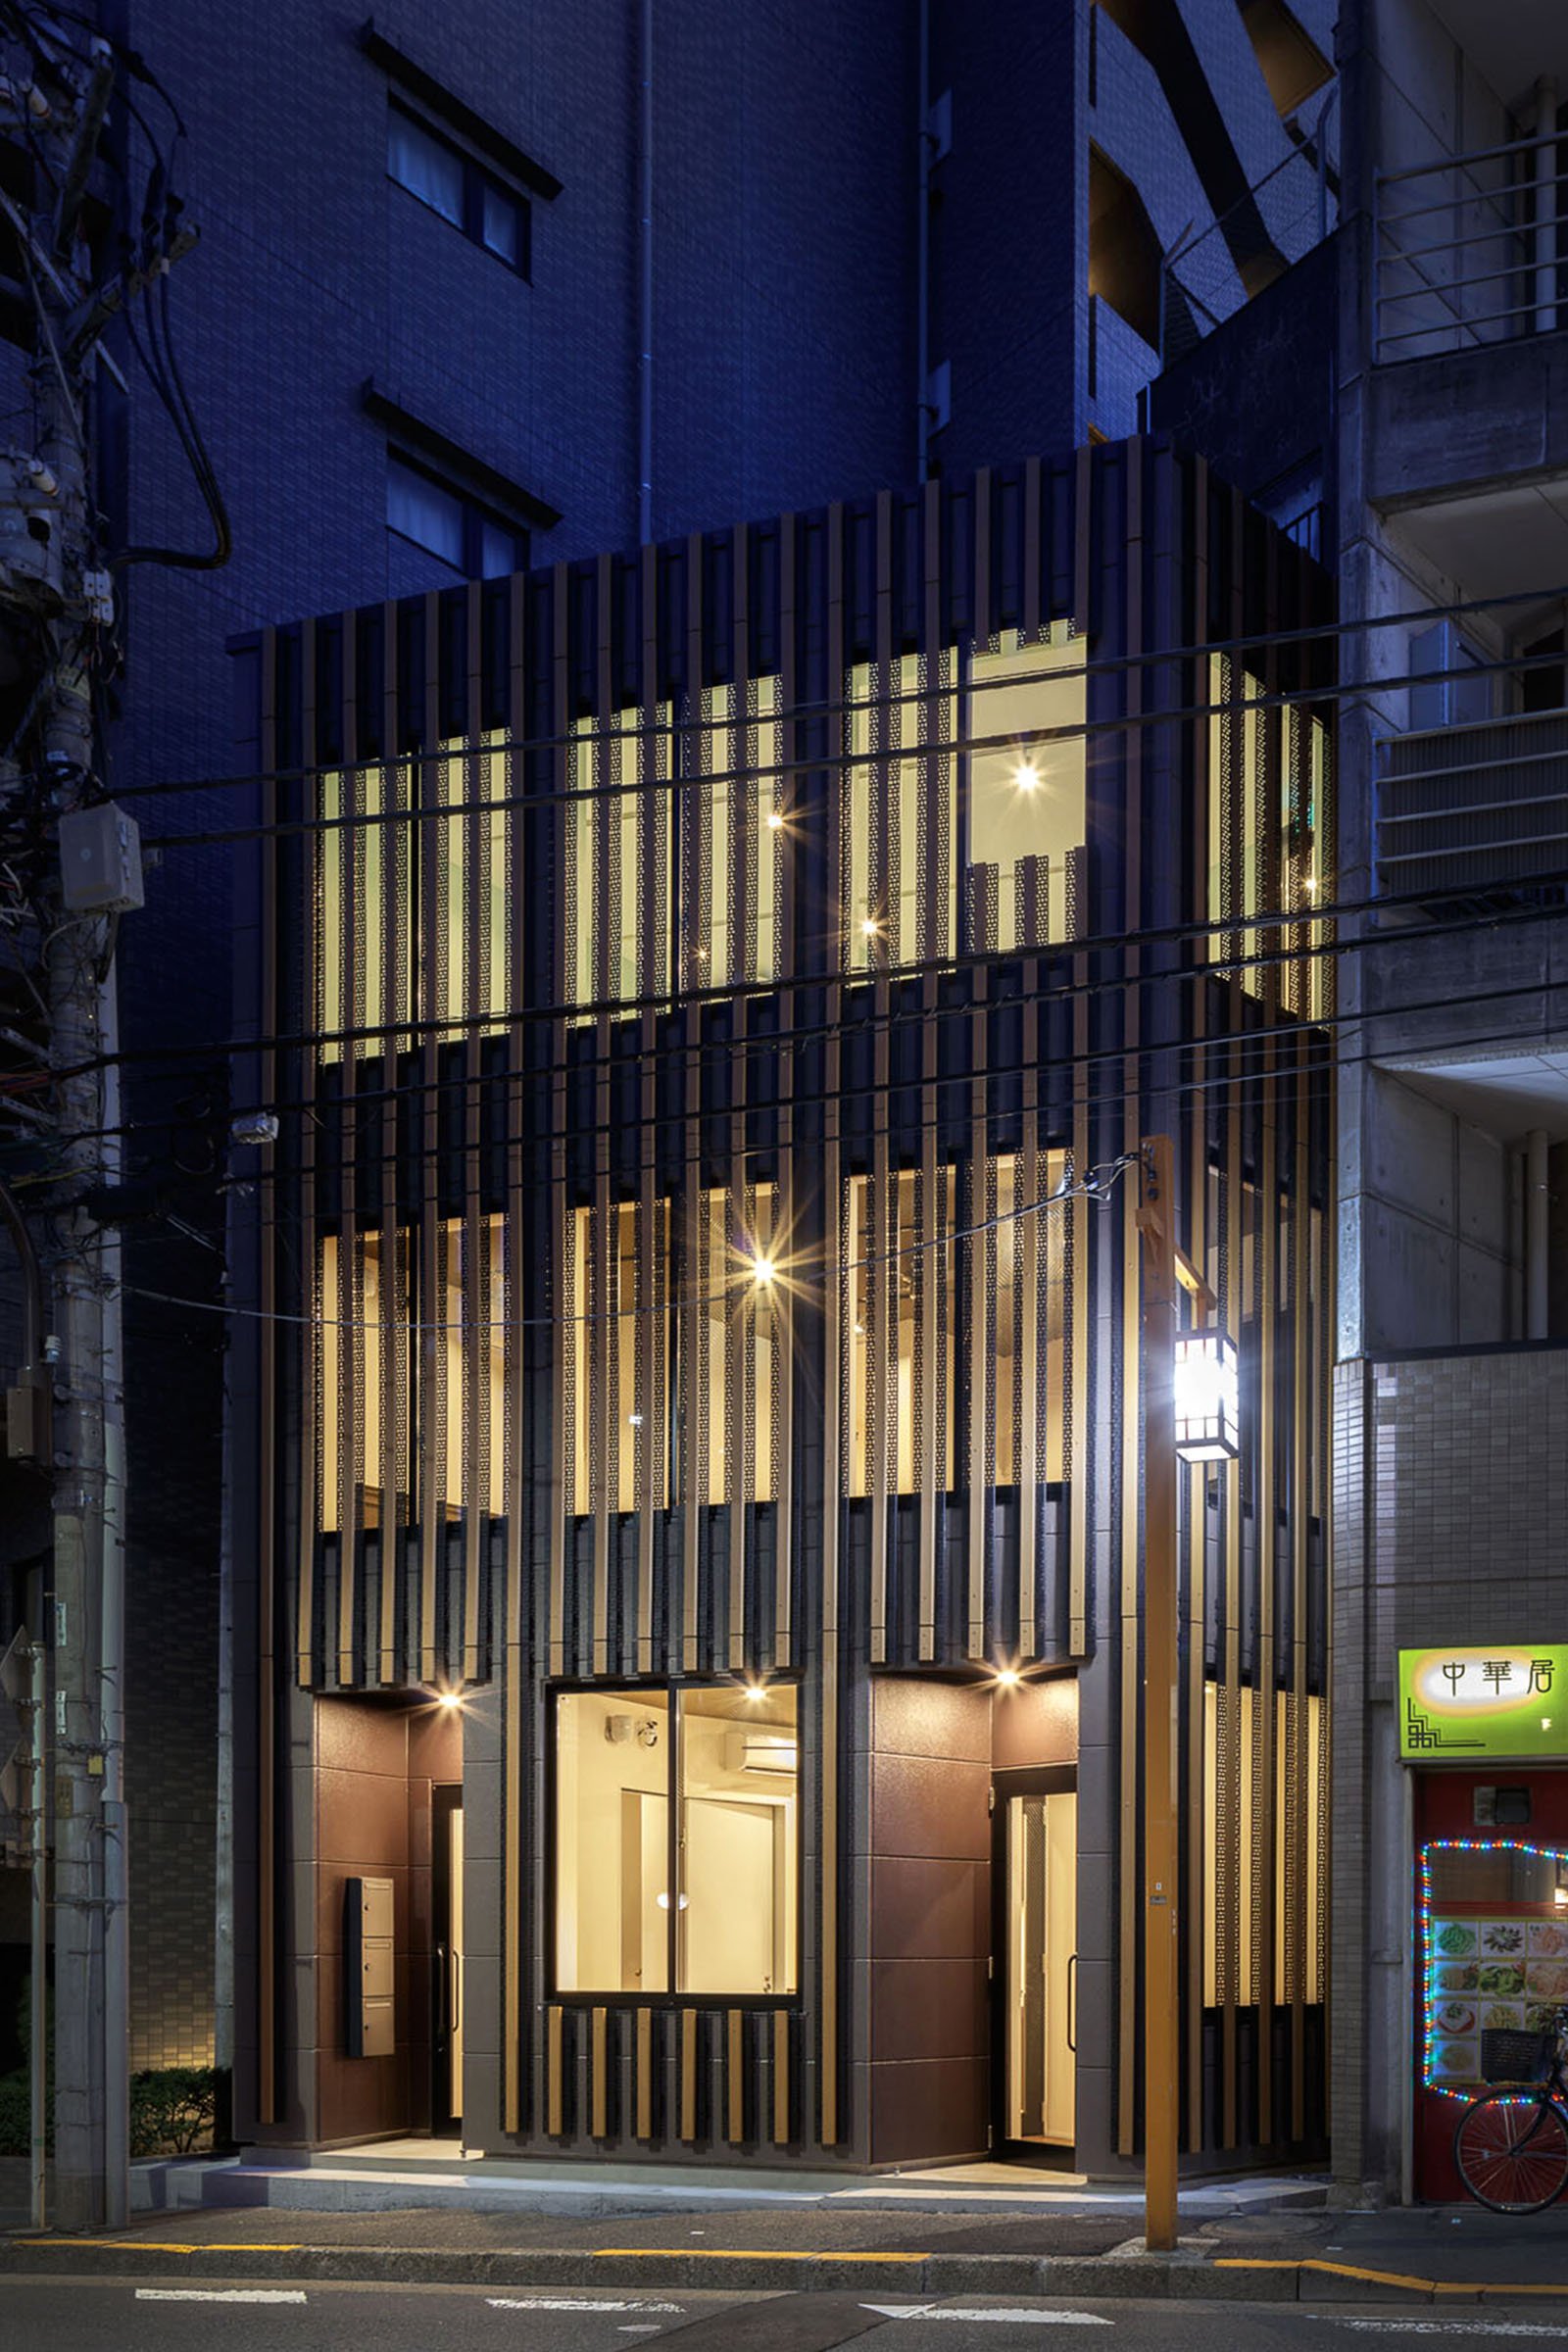 Victoria1842 3 Storey Cafe Commercial Building Shinjuku Tokyo Timber Structure 04.jpg